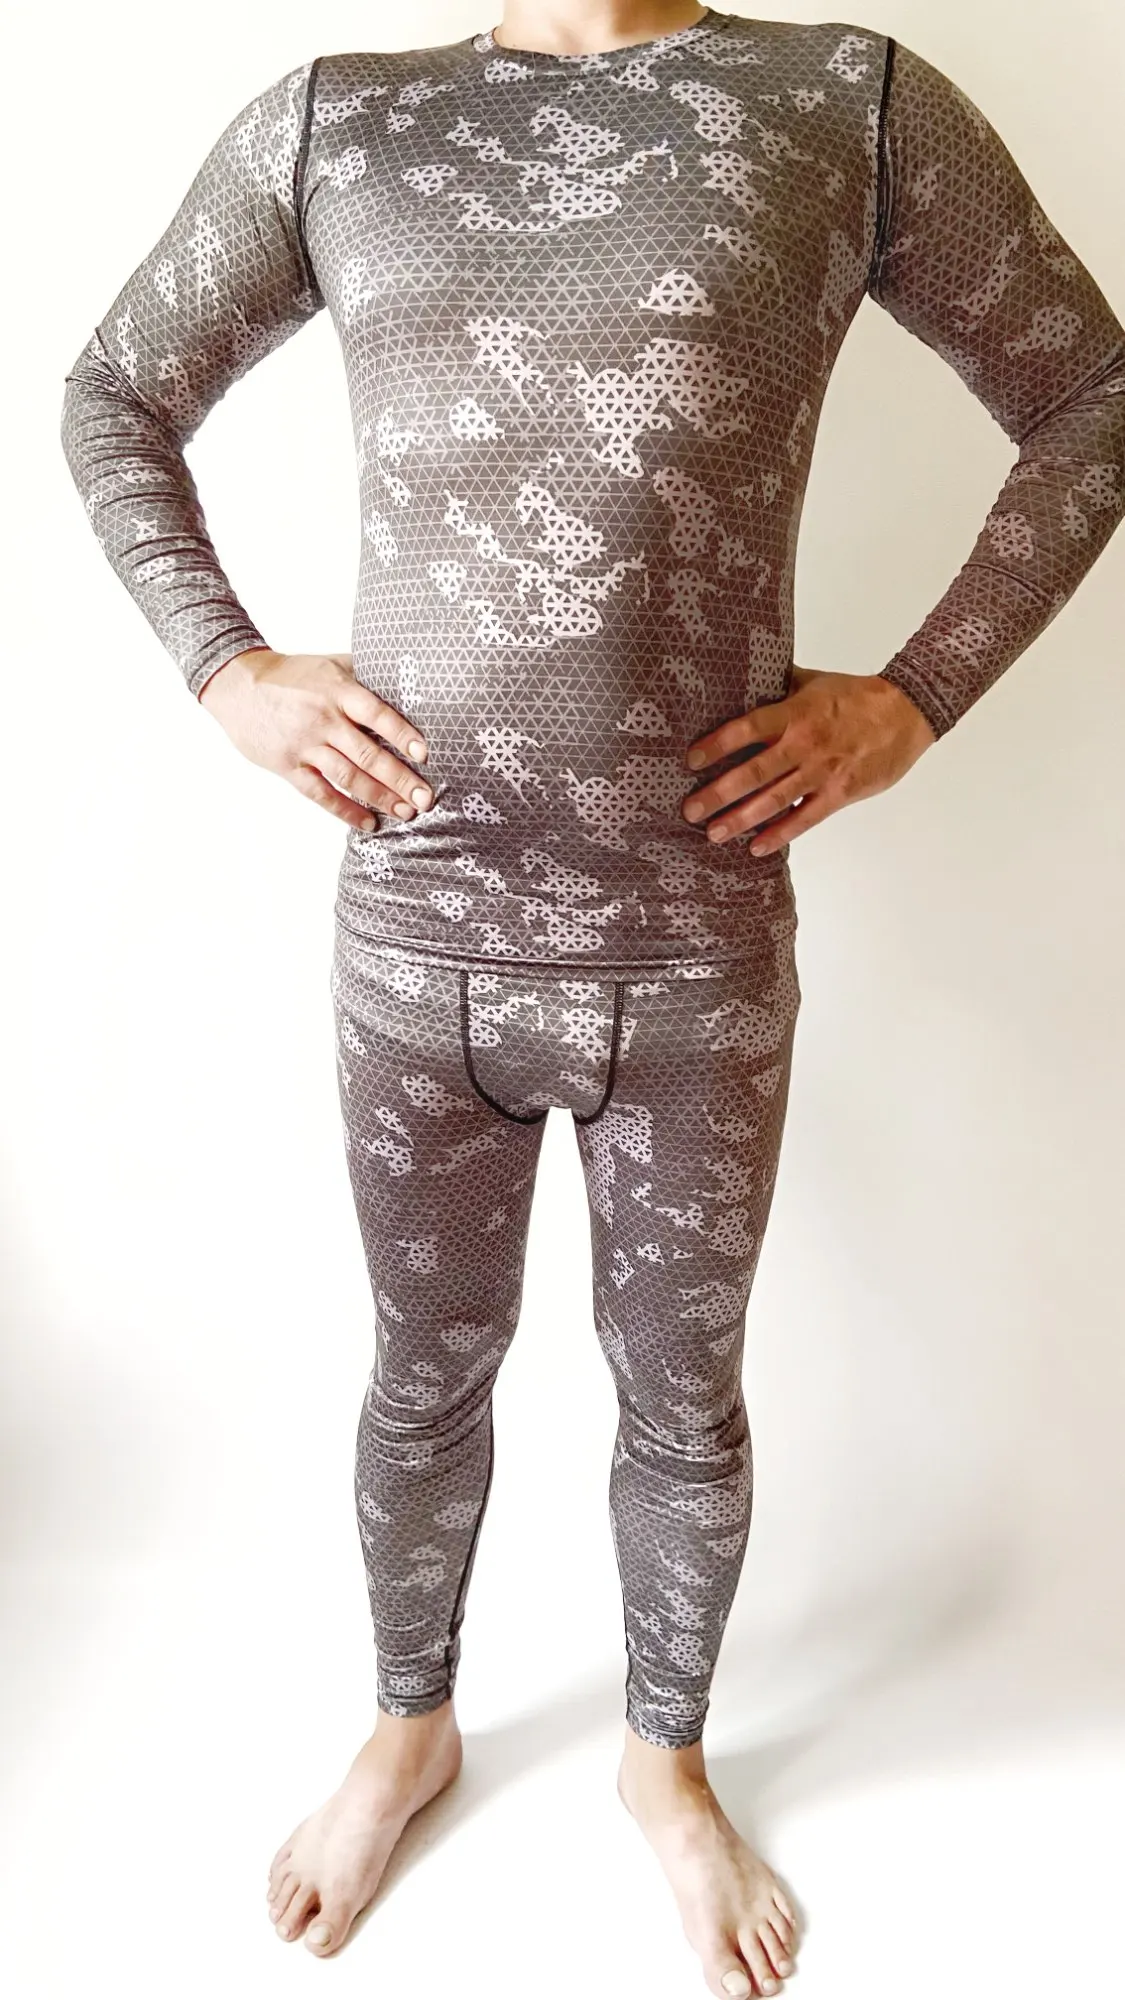 Men's Thermal Underwear For Men Male Thermo Camouflage Clothes Long Johns Set Tights Winter Compression Underwear Quick Dry photo review